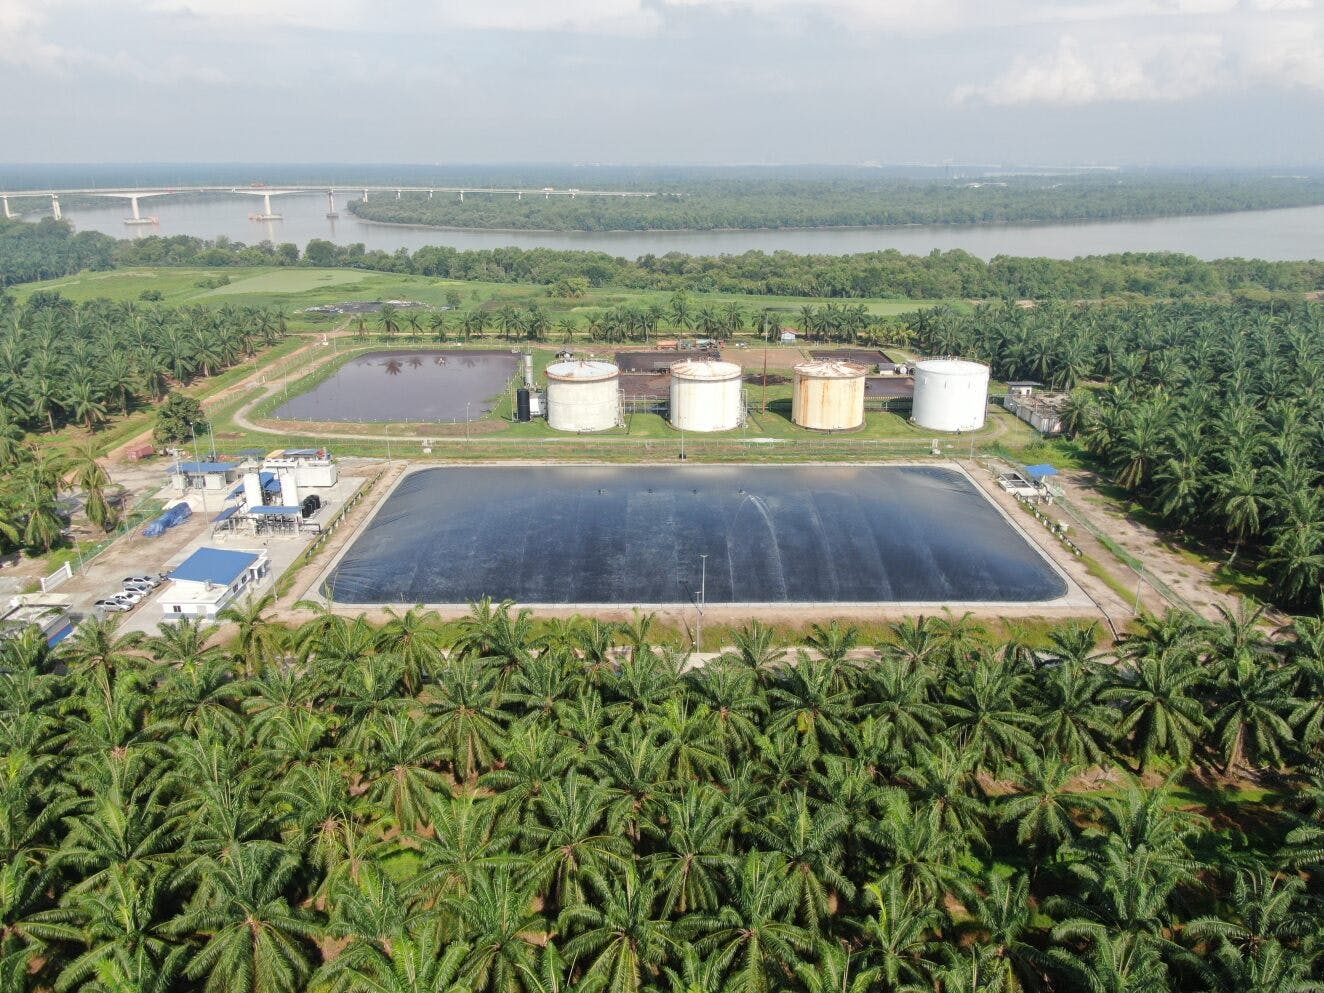 Biogas production from anaerobic waste stabilization ponds, typically used for treatment of wastewater from farms and industry, is a smart, sustainable, eco-responsible option.